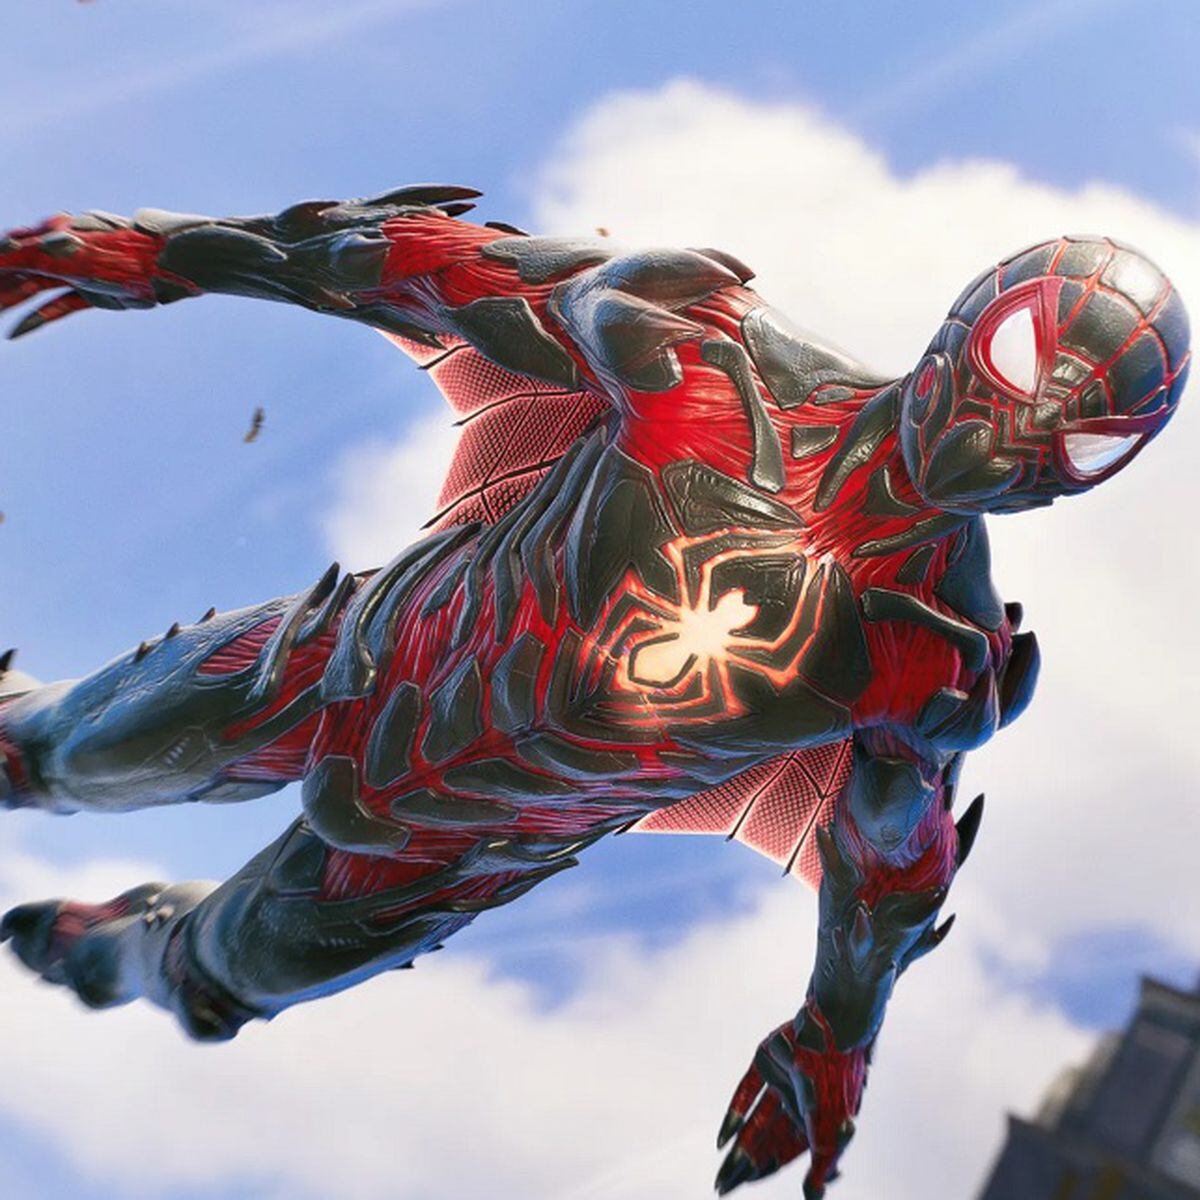 Sony adds Spider-Man: Far From Home costumes to PS4 game - CNET